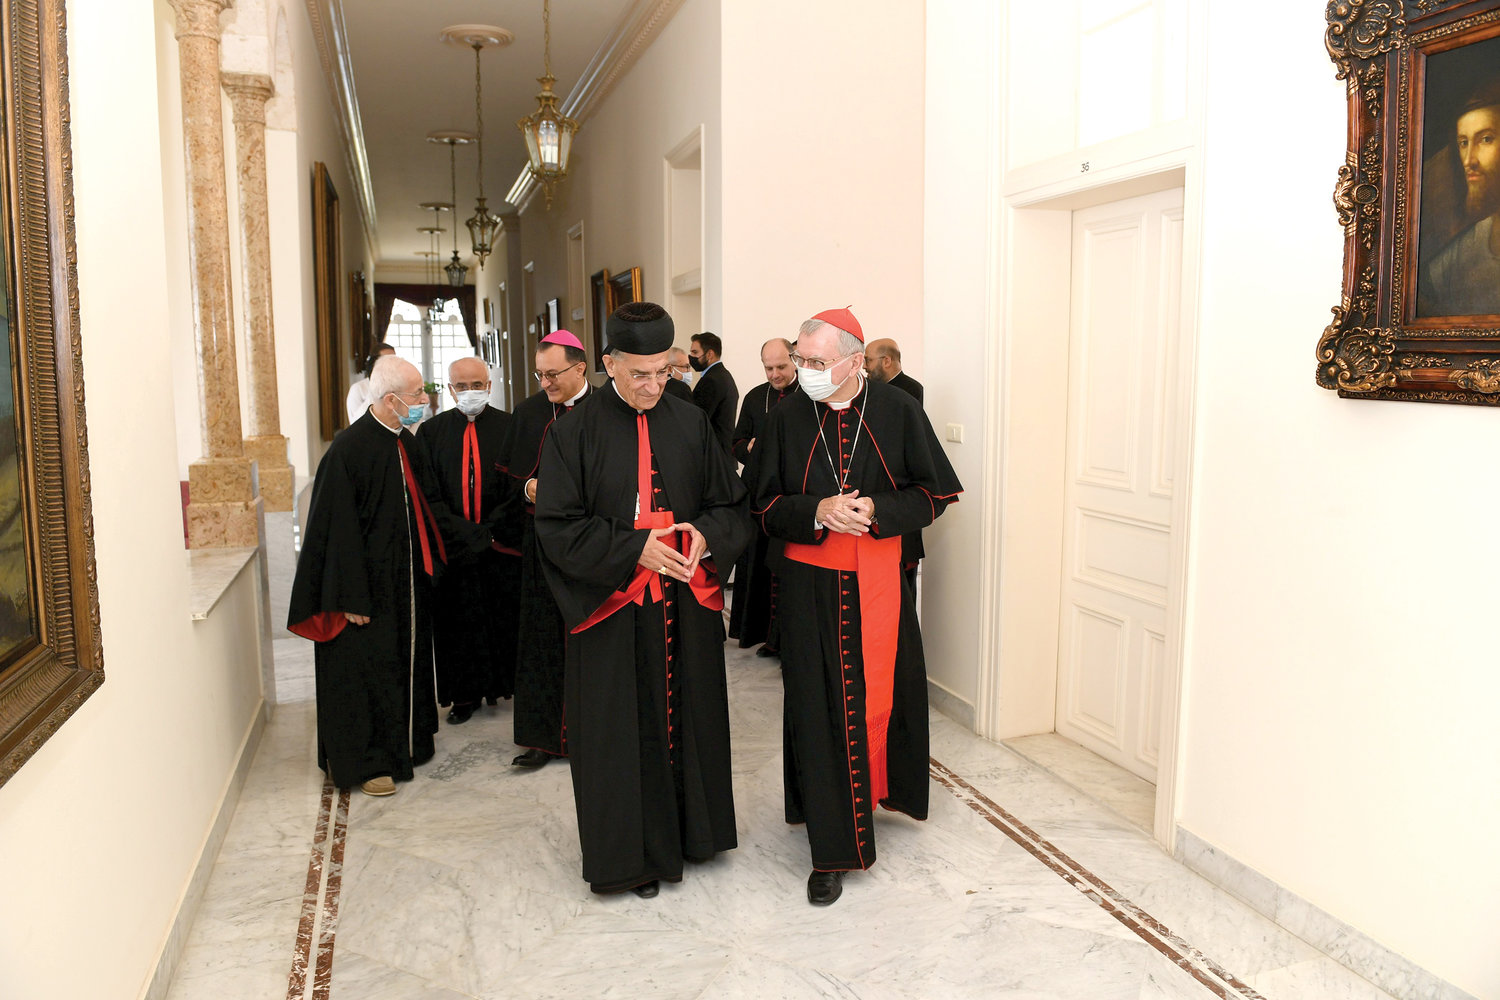 CHURCH RESPONSE—Cardinal Pietro Parolin, Vatican secretary of state, right, visits with Lebanese Cardinal Bechara Boutros Rai, Maronite patriarch of Antioch, and other religious leaders in Bkerke, Lebanon, Sept. 4, one month after the explosion in Beirut.